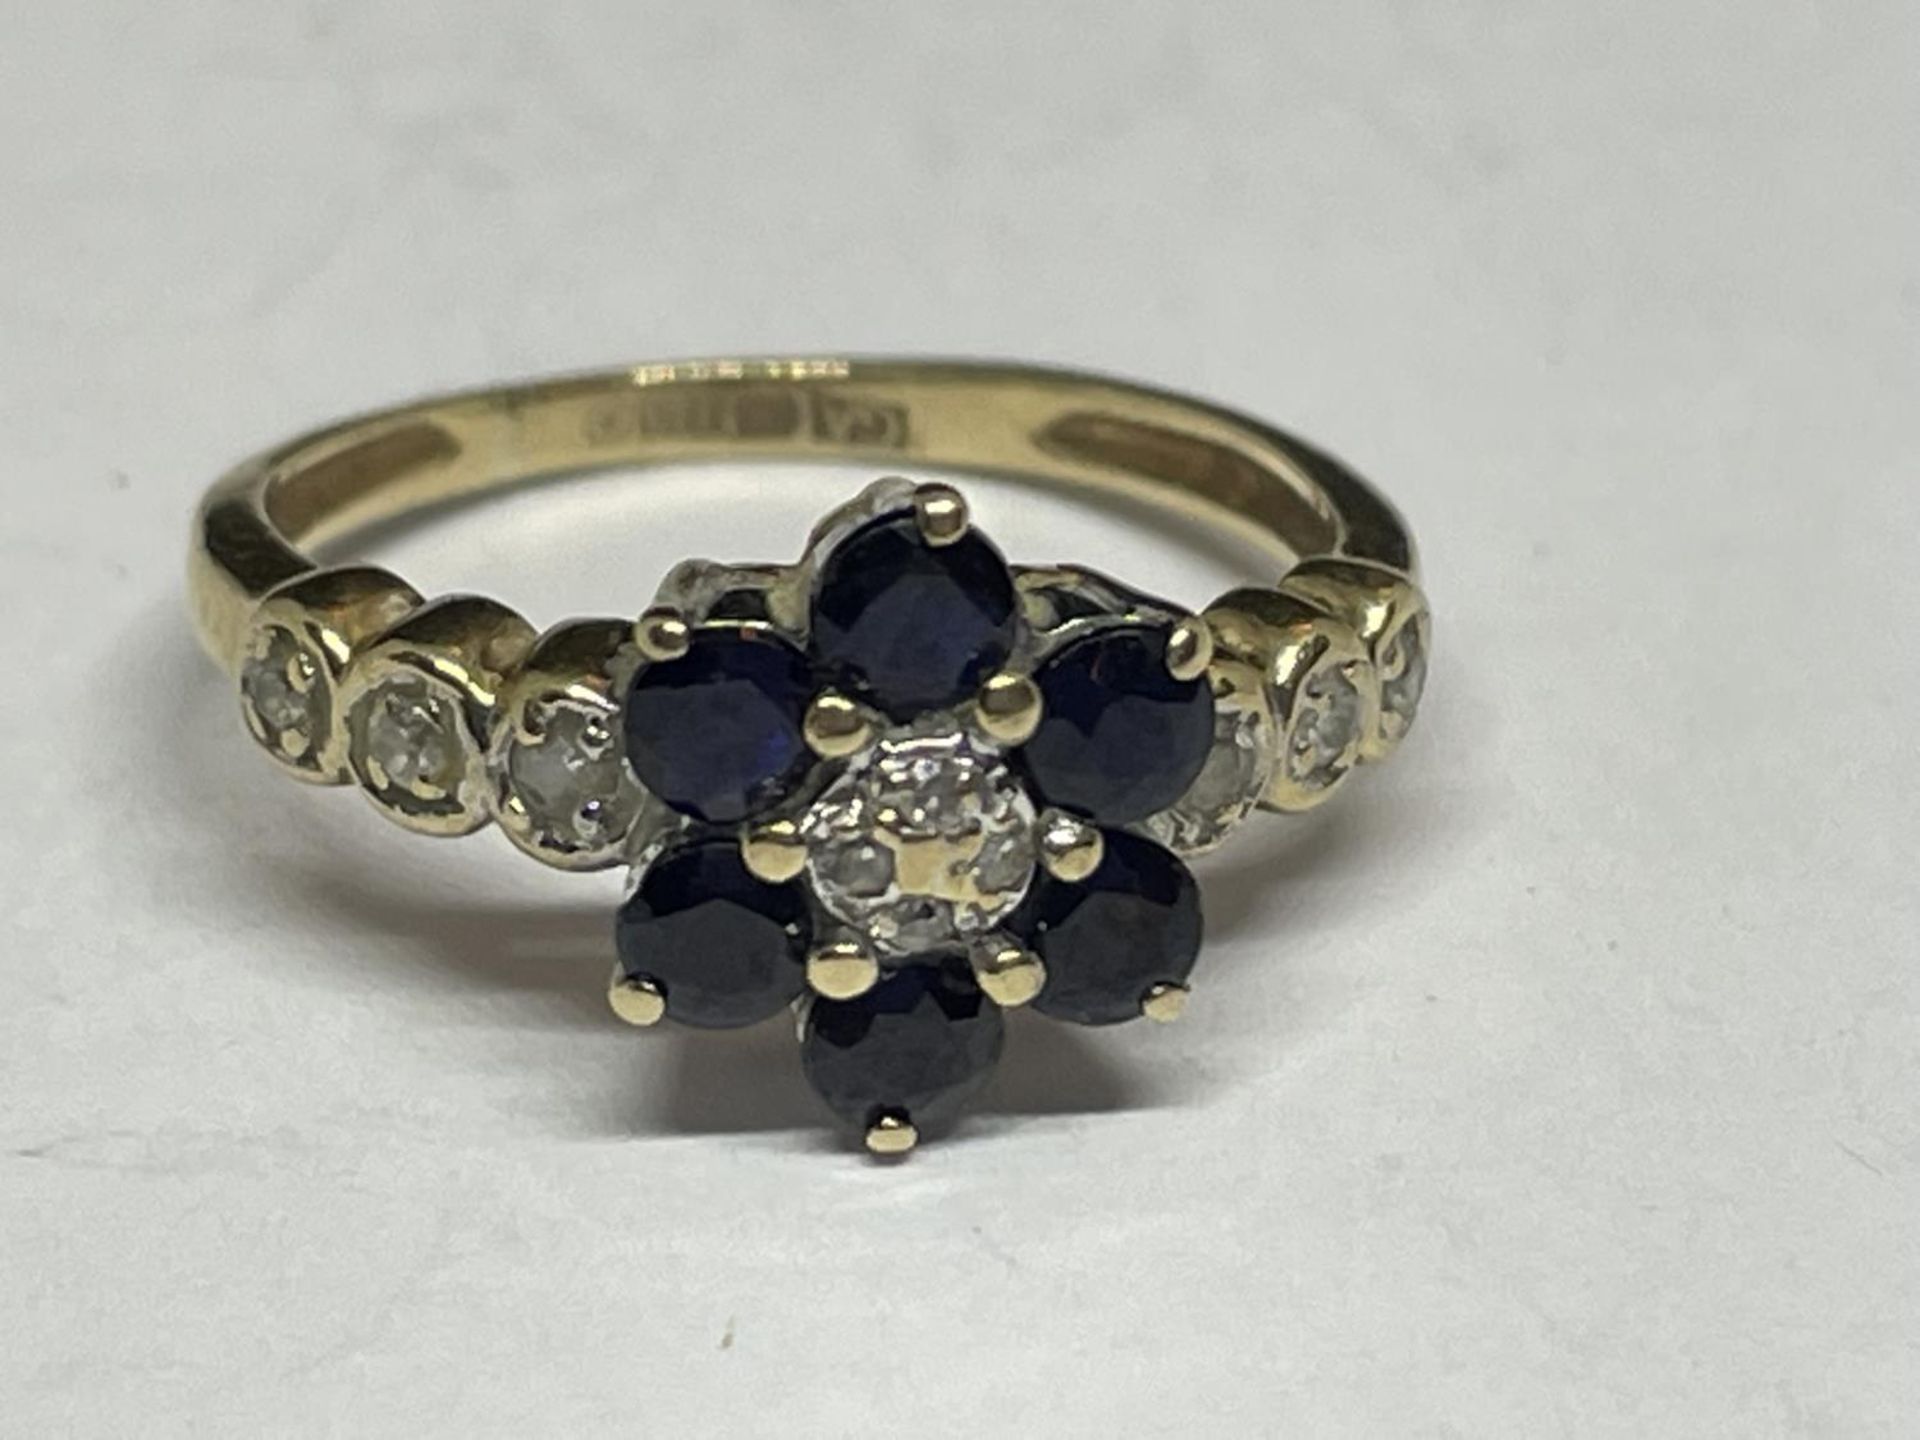 A 9 CARAT GOLD RING WITH SAPPHIRES AND DIAMONDS IN A FLOWER DESIGN AND DIAMONDS ON THE SHOULDERS